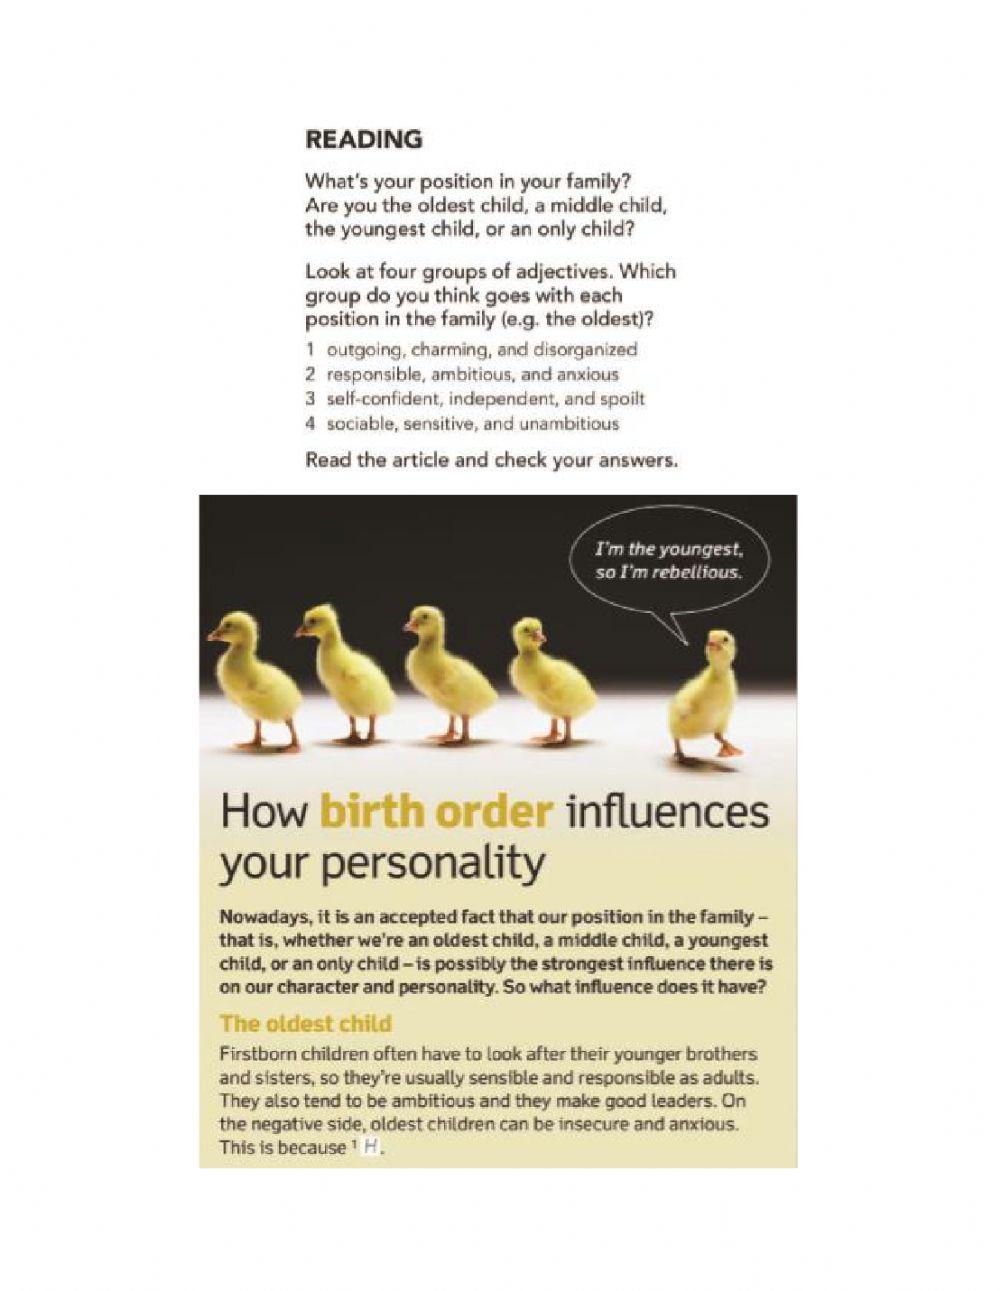 How birth order influences your personality